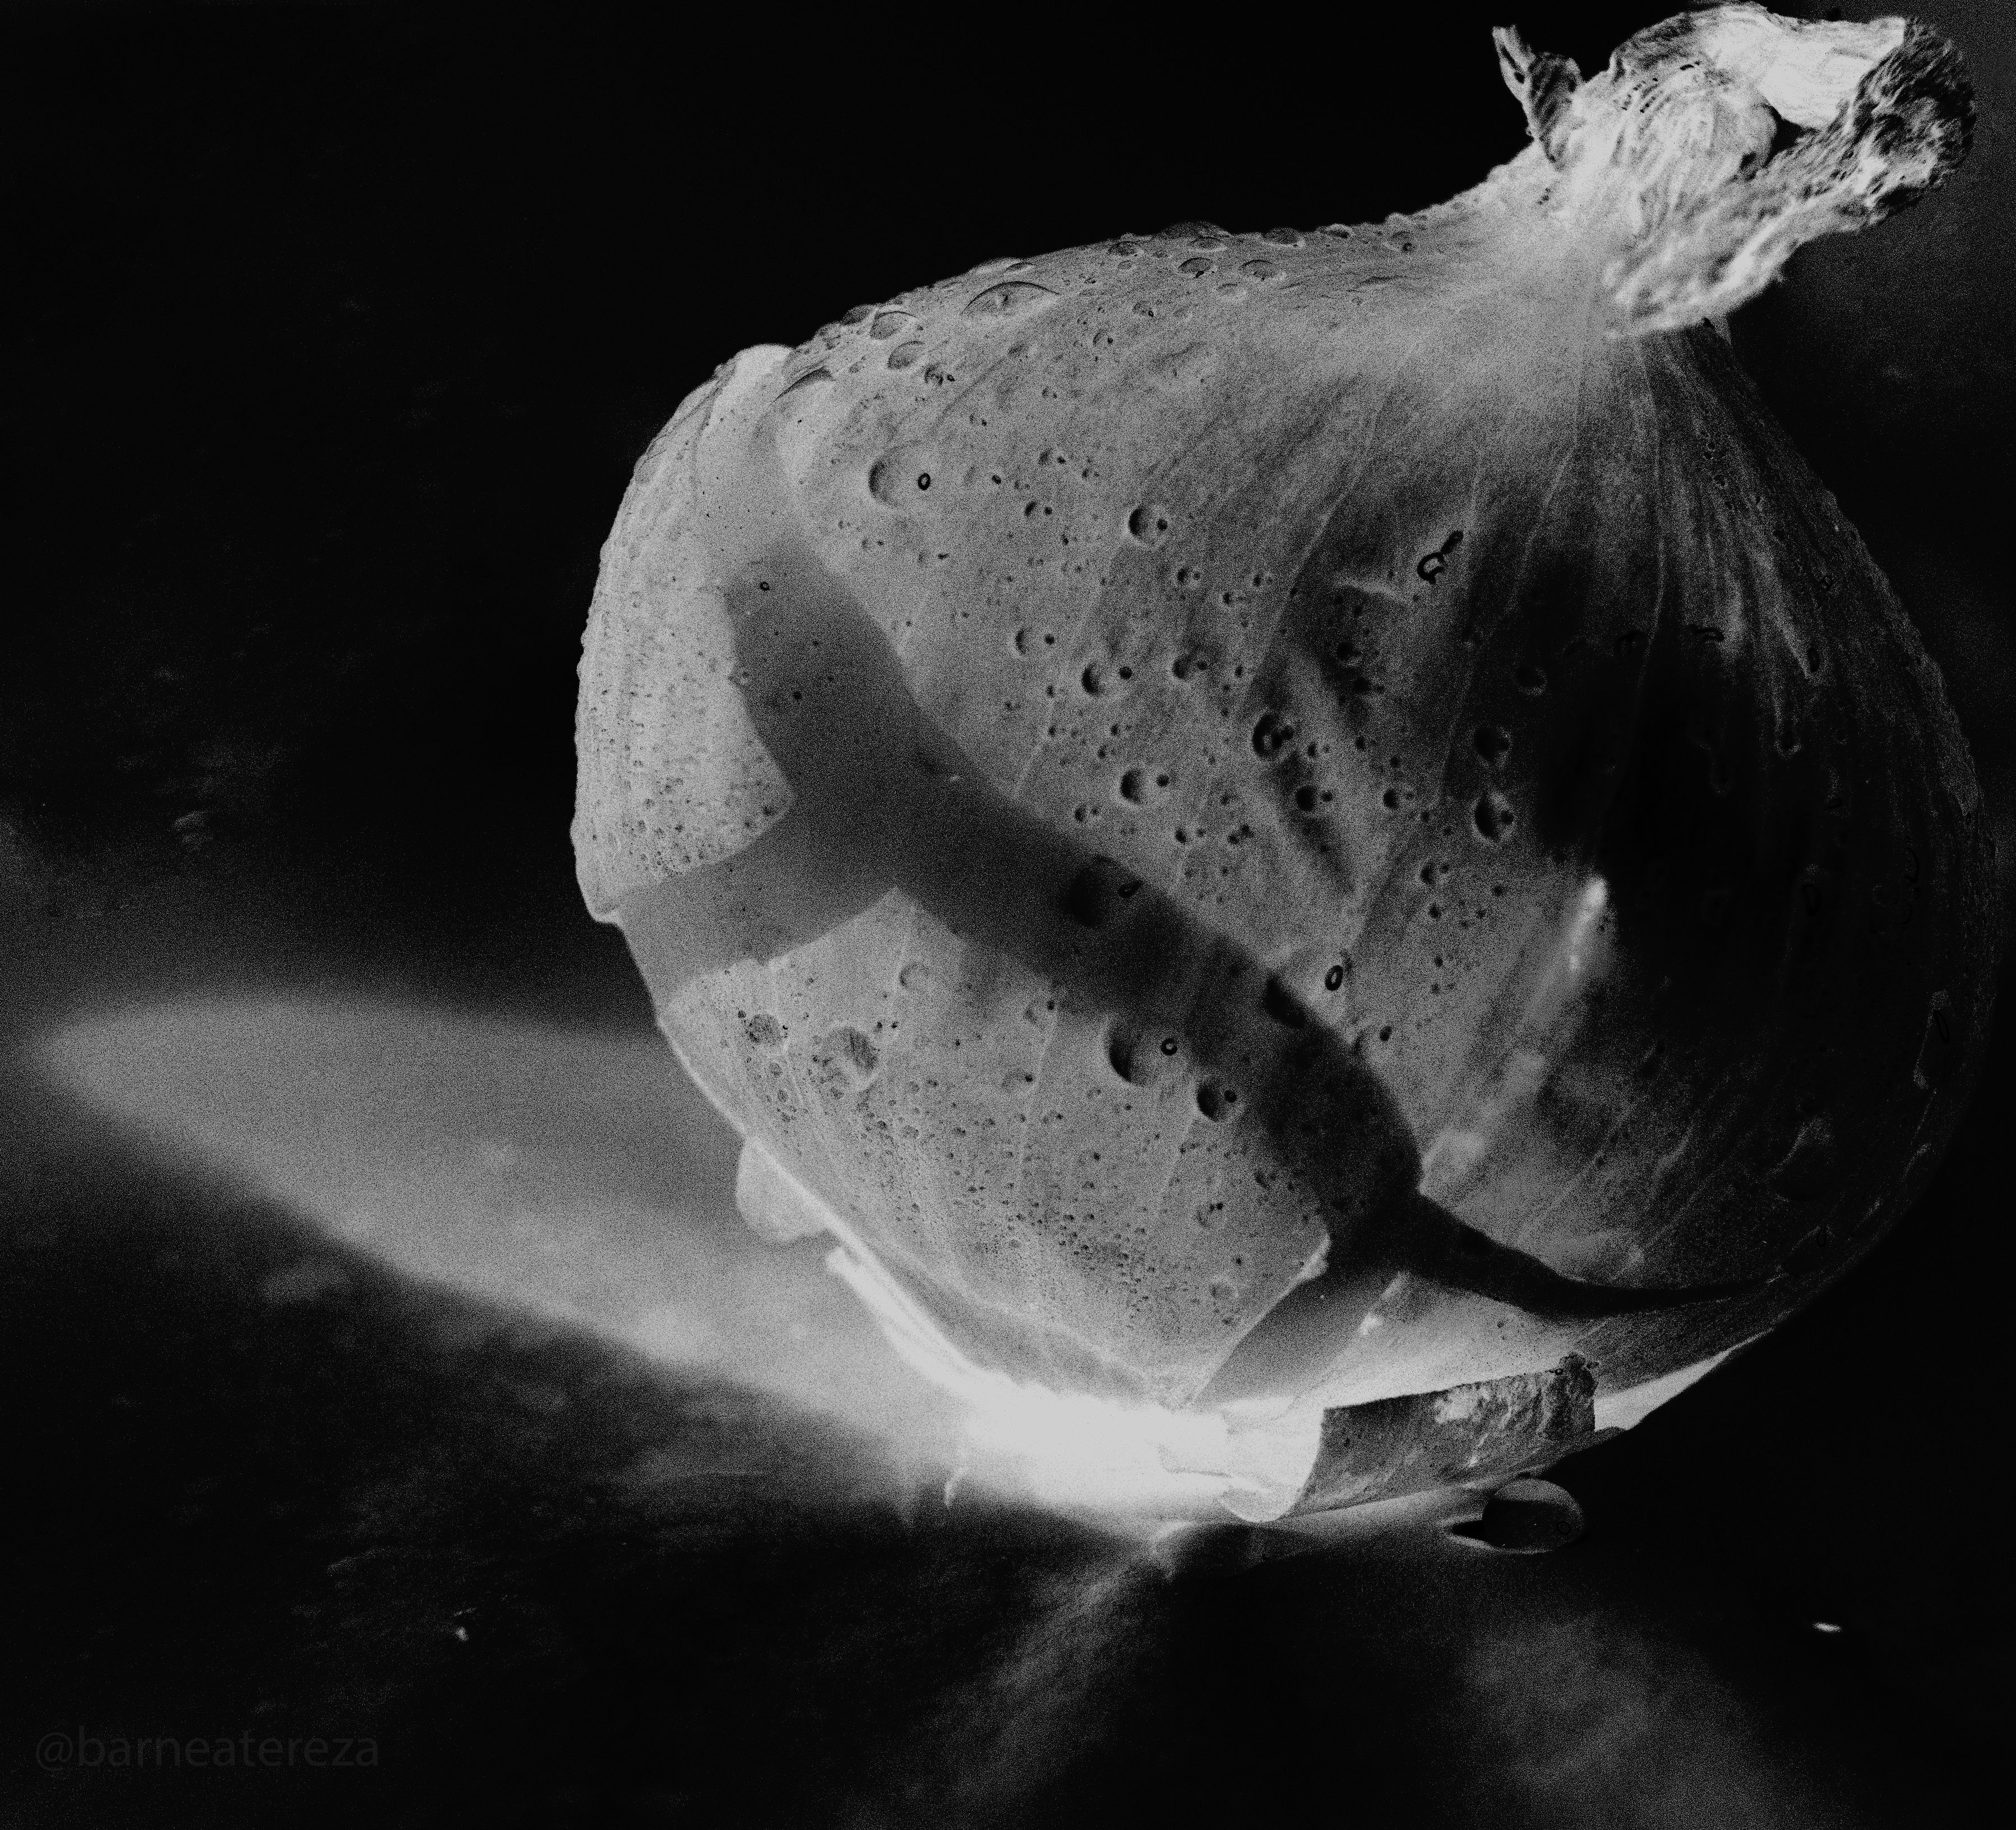 radiography of an onion_result.jpg